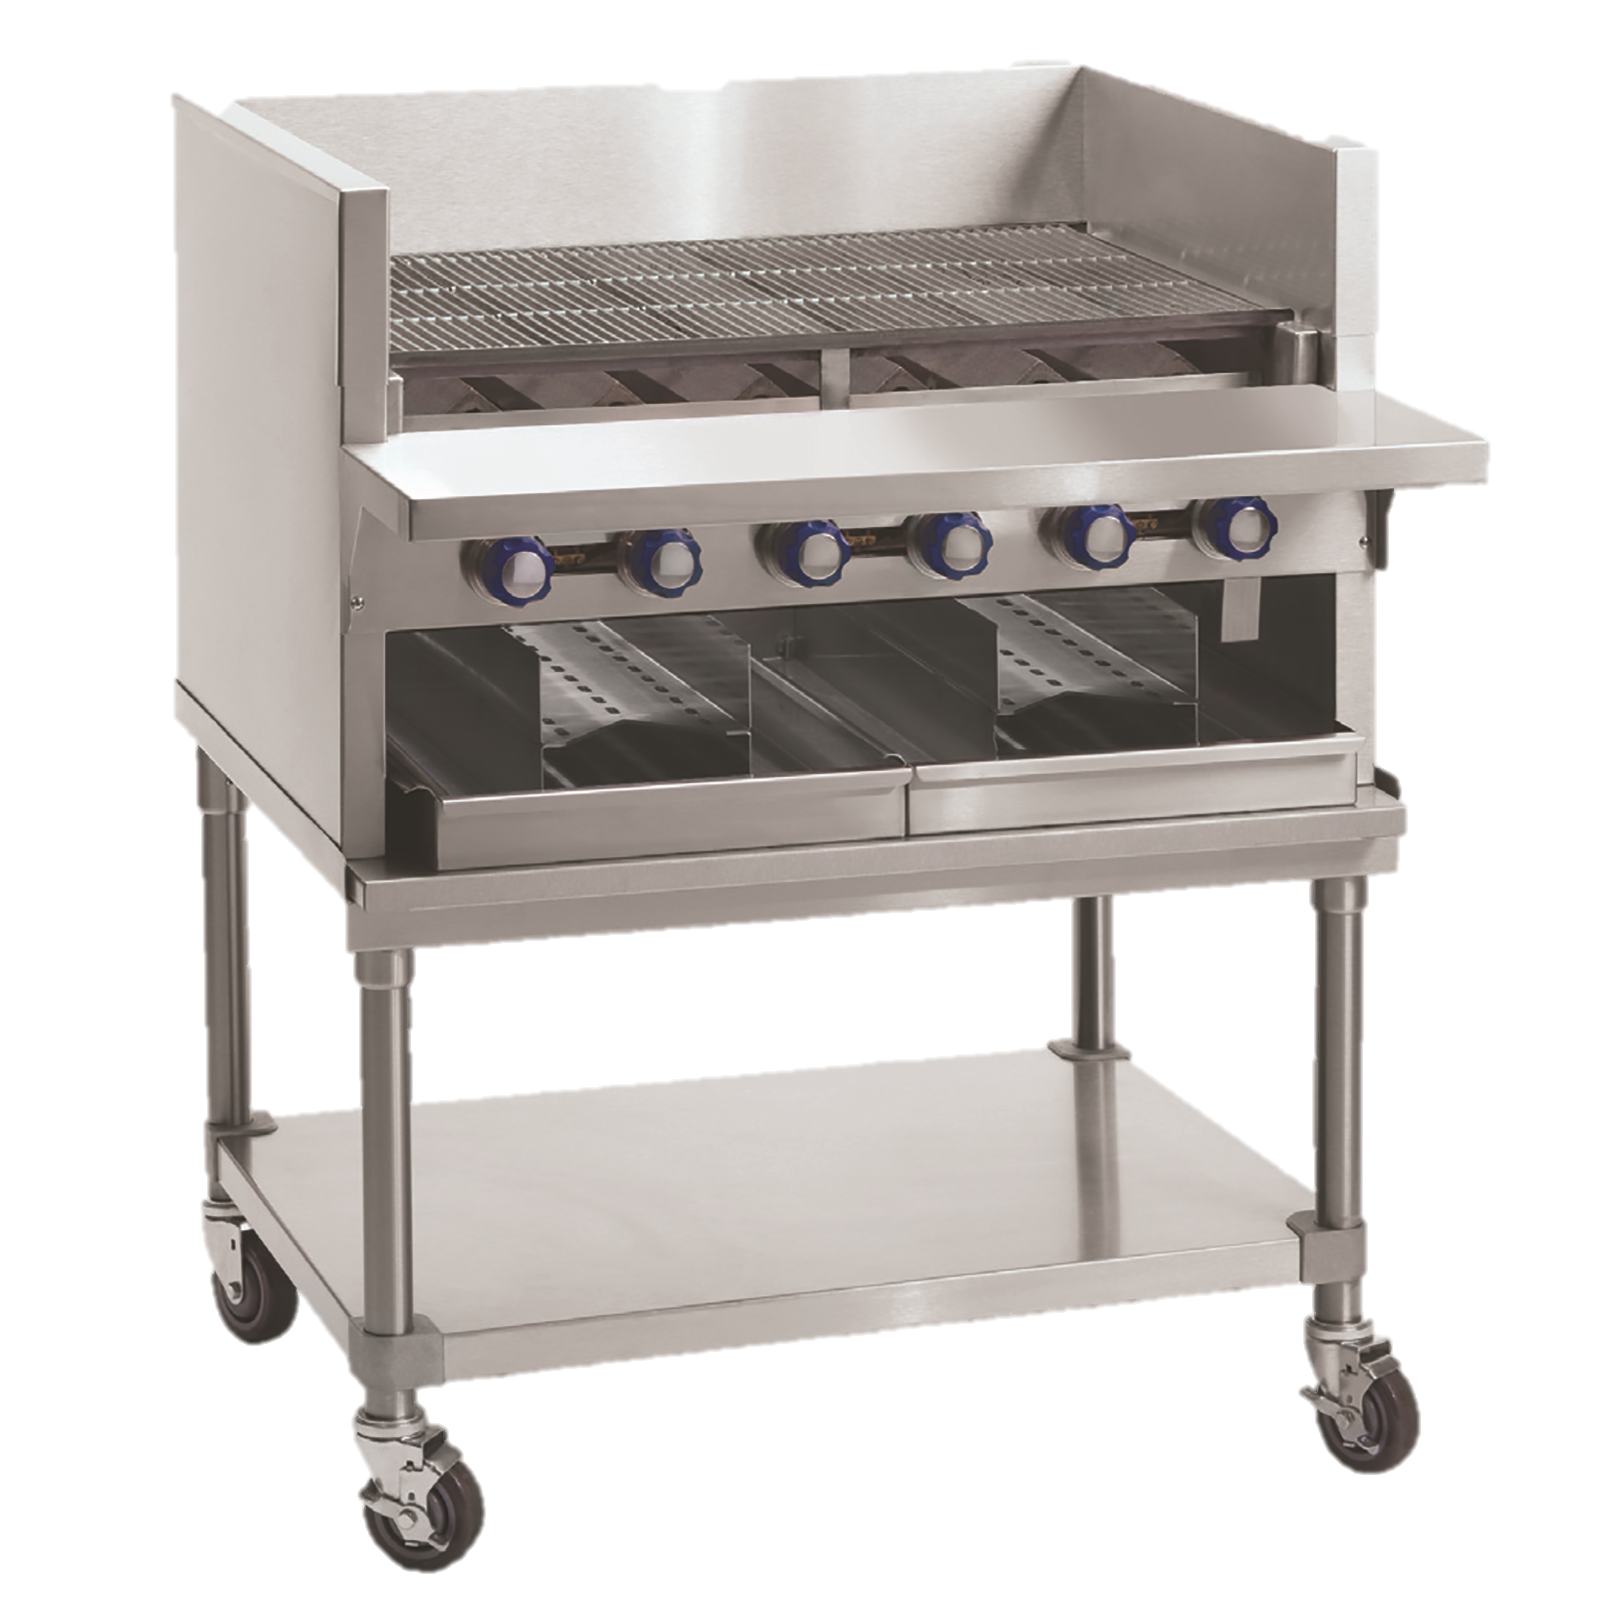 superior-equipment-supply - Imperial - Imperial Stainless Steel 72" Wide Equipment Stand